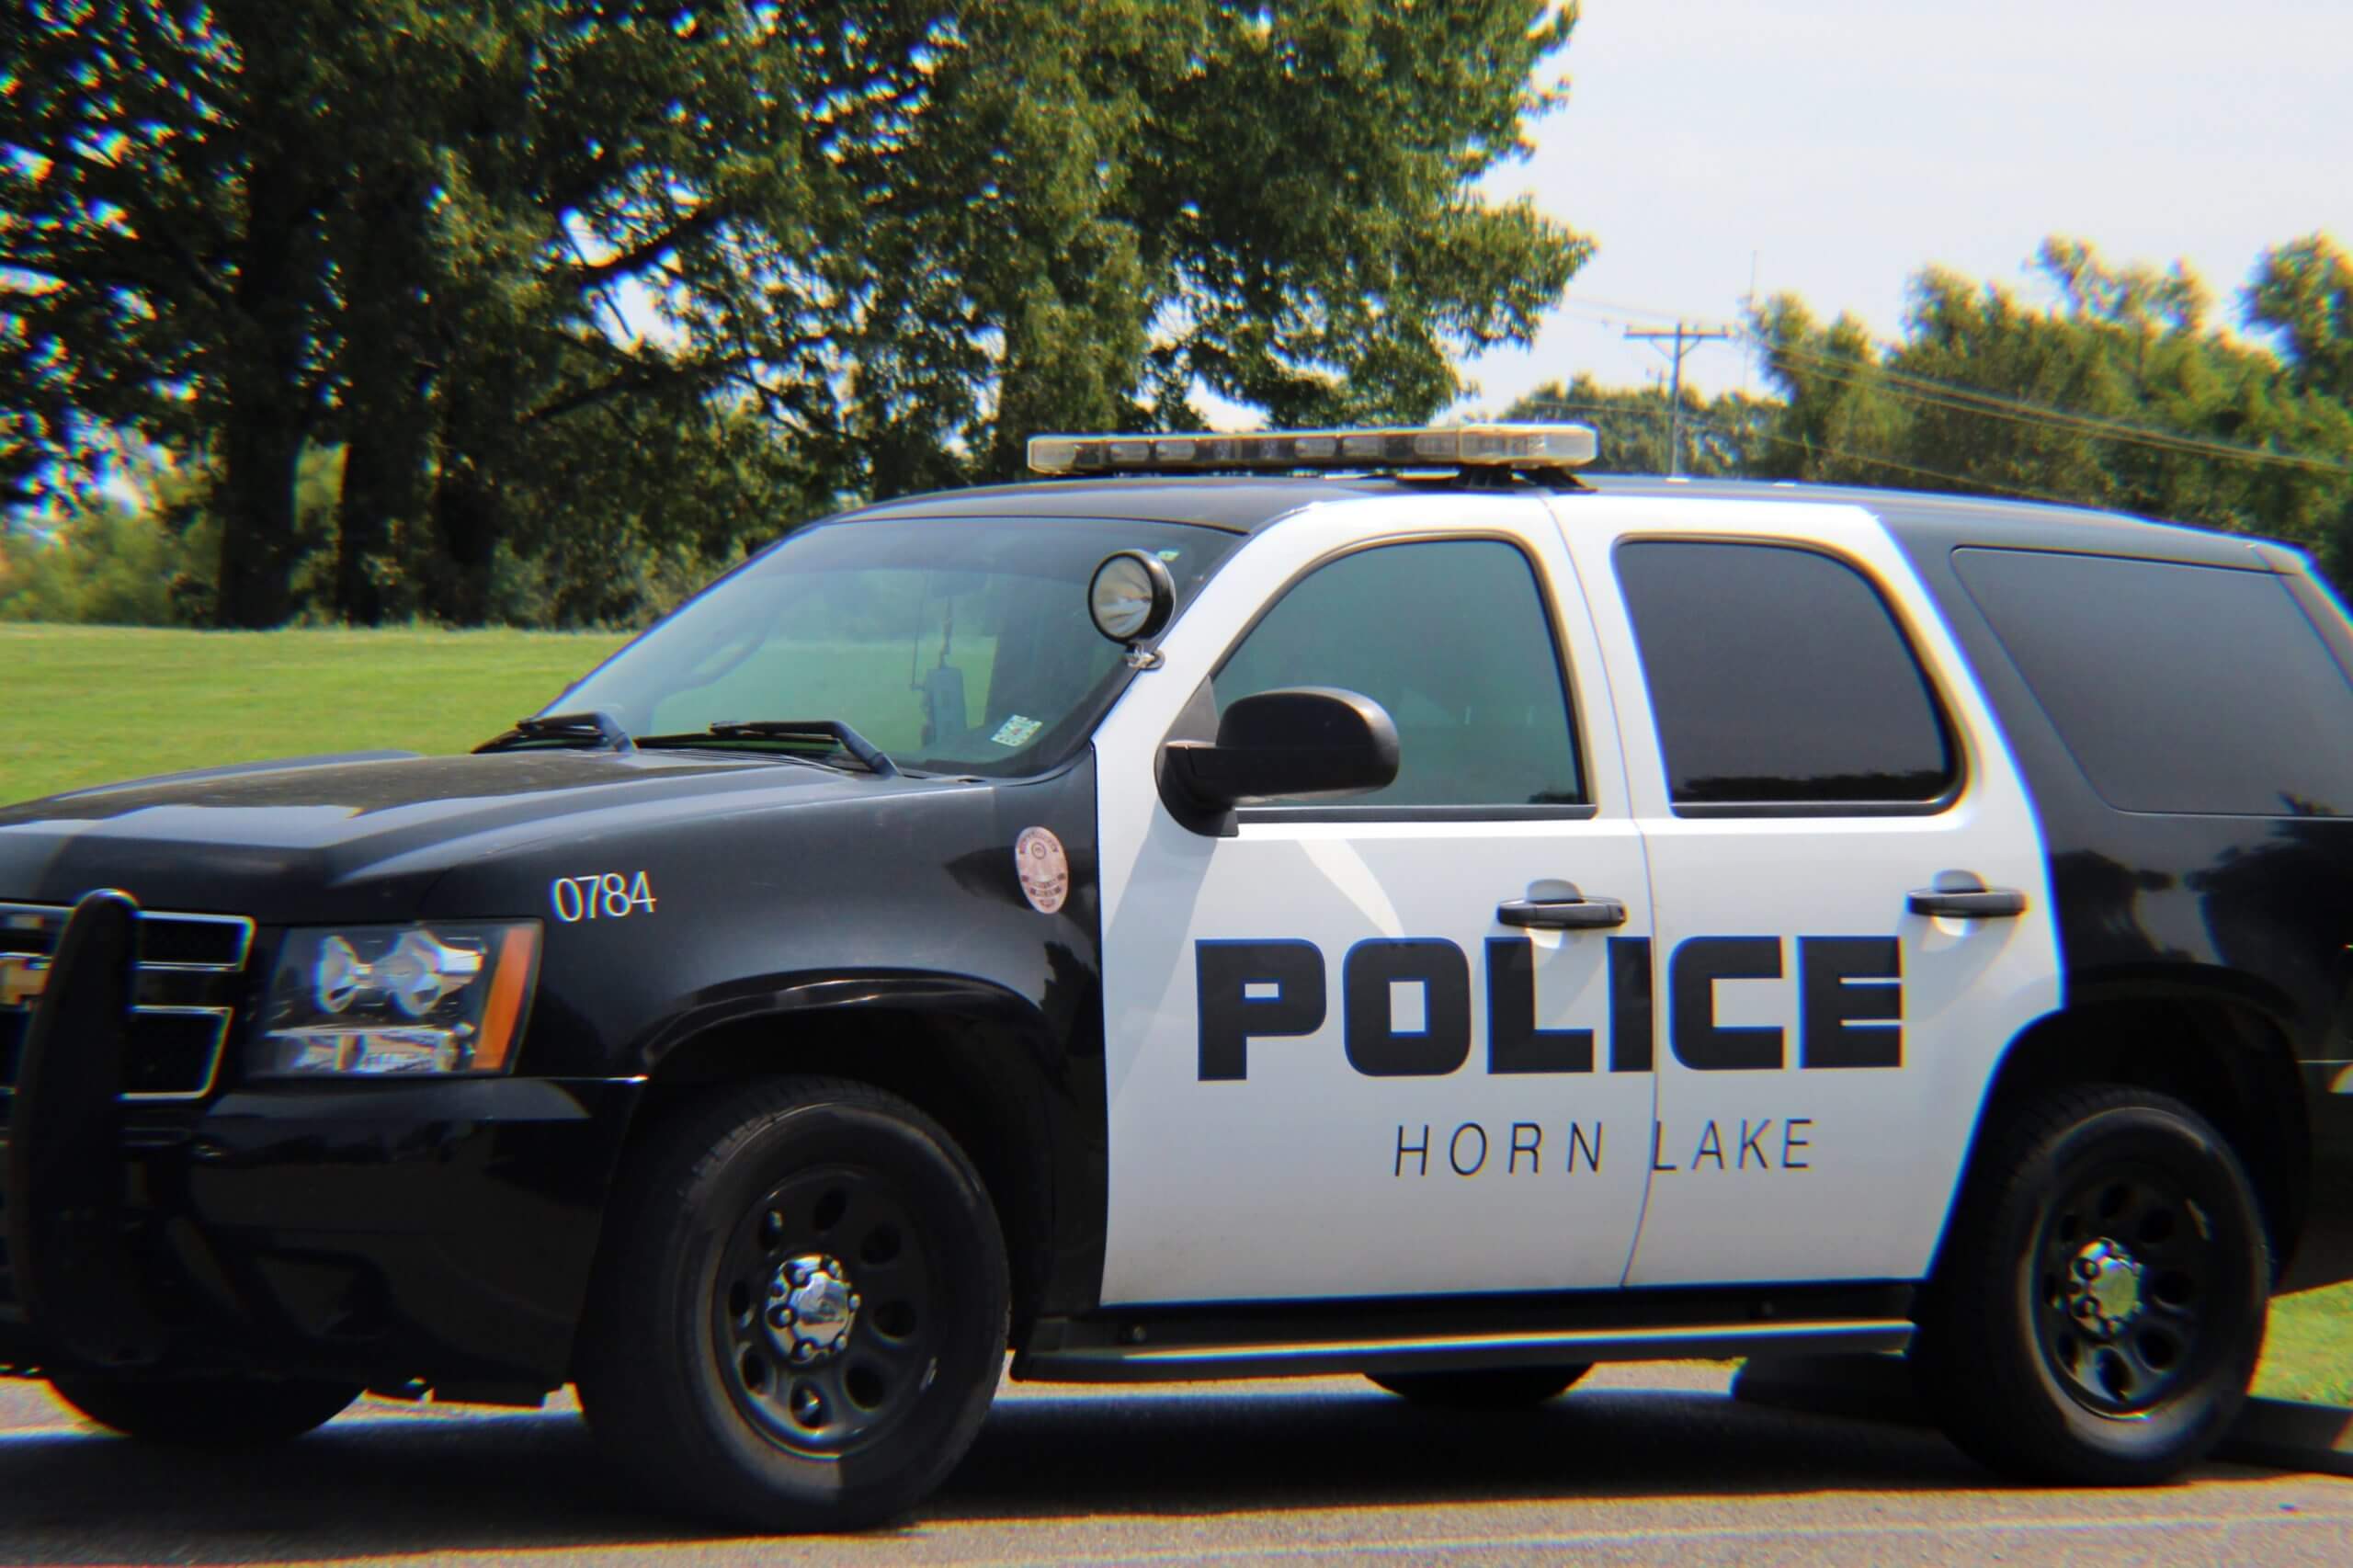 Horn Lake Police adds first women to TACT team